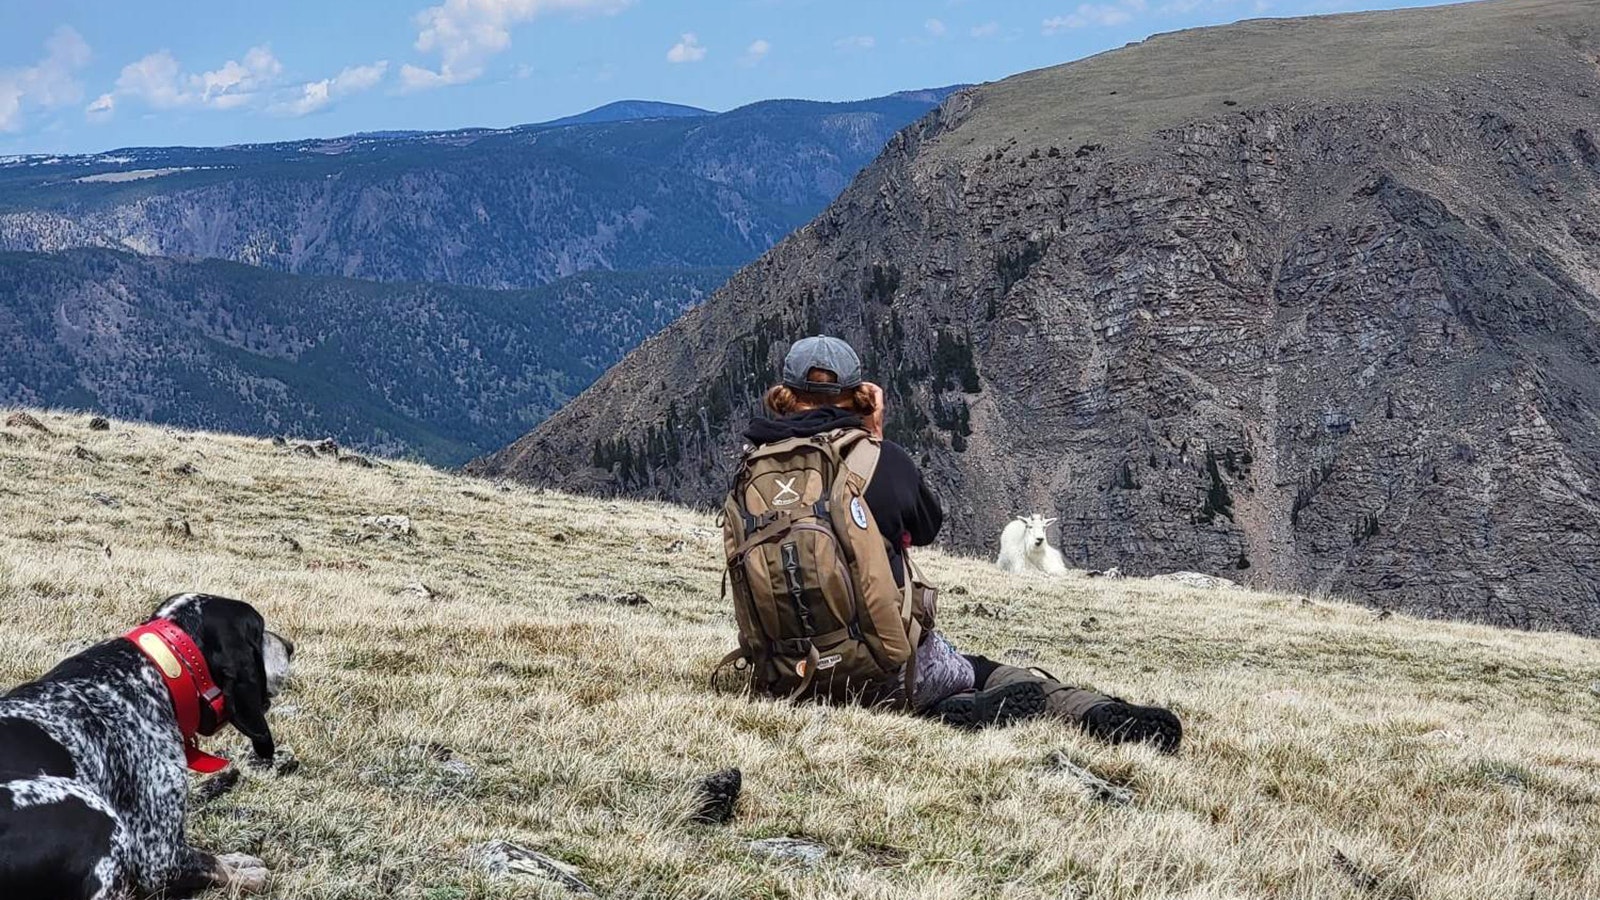 Tessa Fowler of Cody and her blue tick hound dog Warden are frequently in the Wyoming high country, looking for Rocky Mountain goats and bighorn sheep.